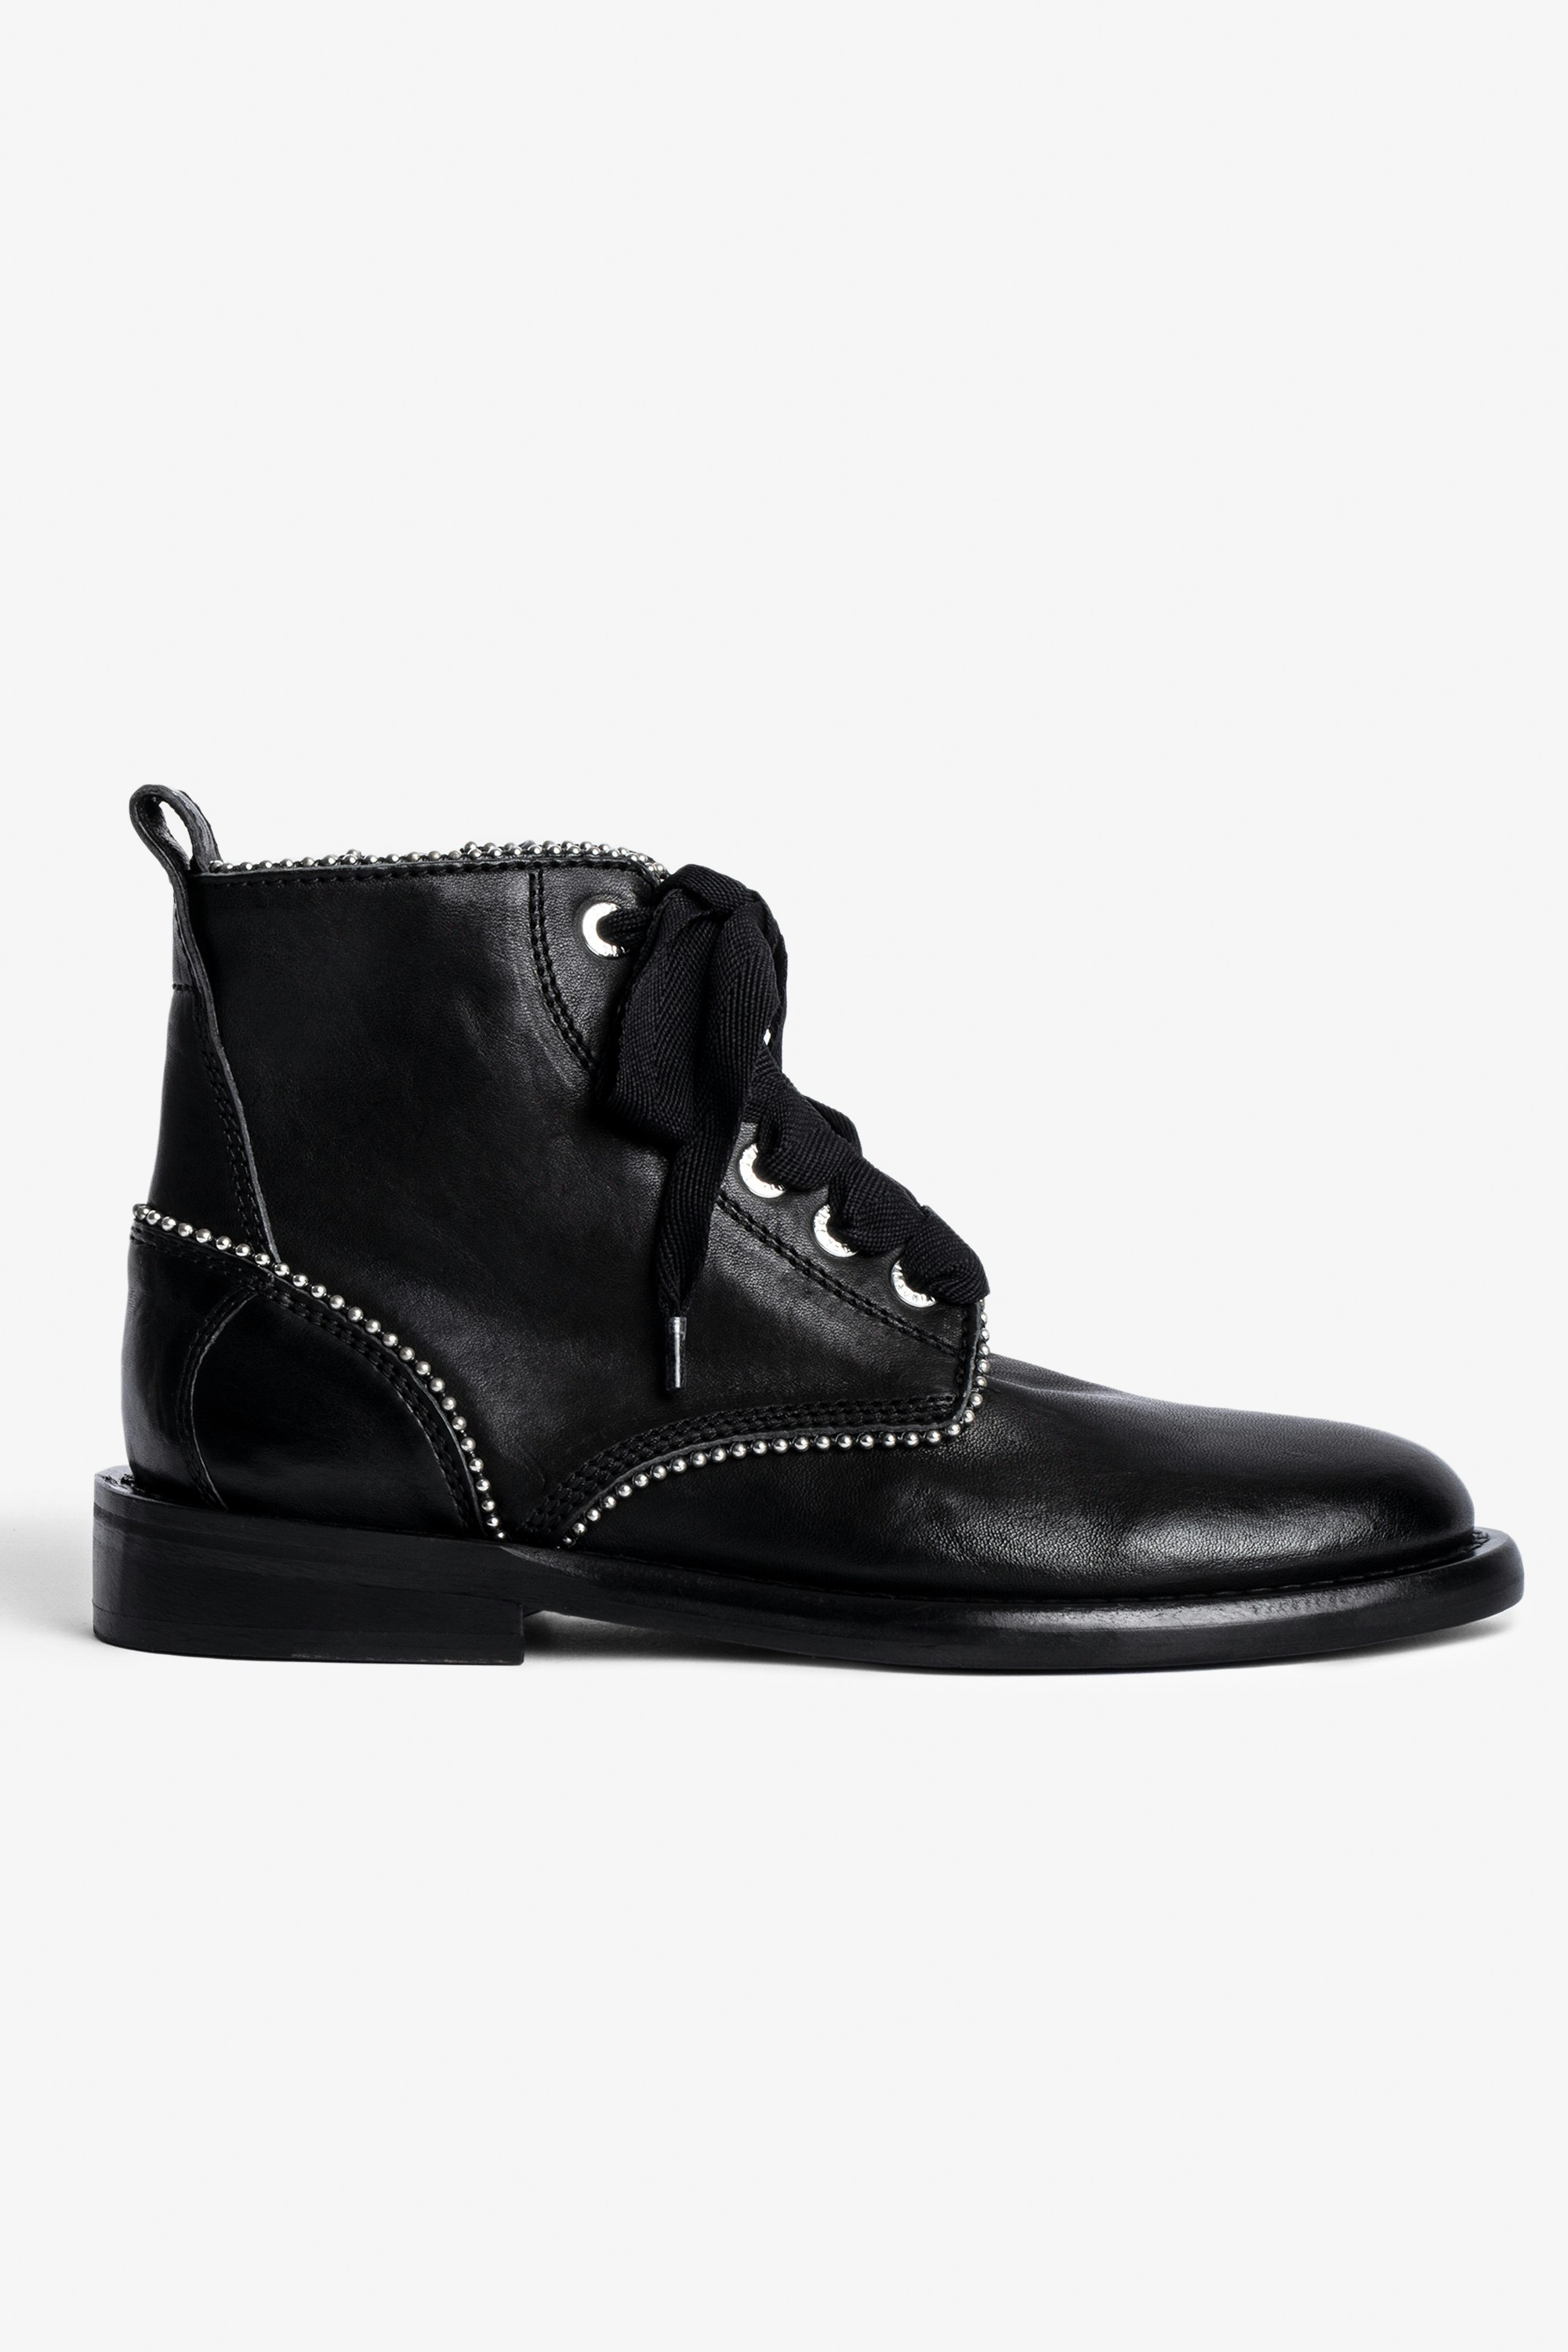 Laureen Roma Studs Ankle Boots - Women’s black leather lace-up ankle boots.